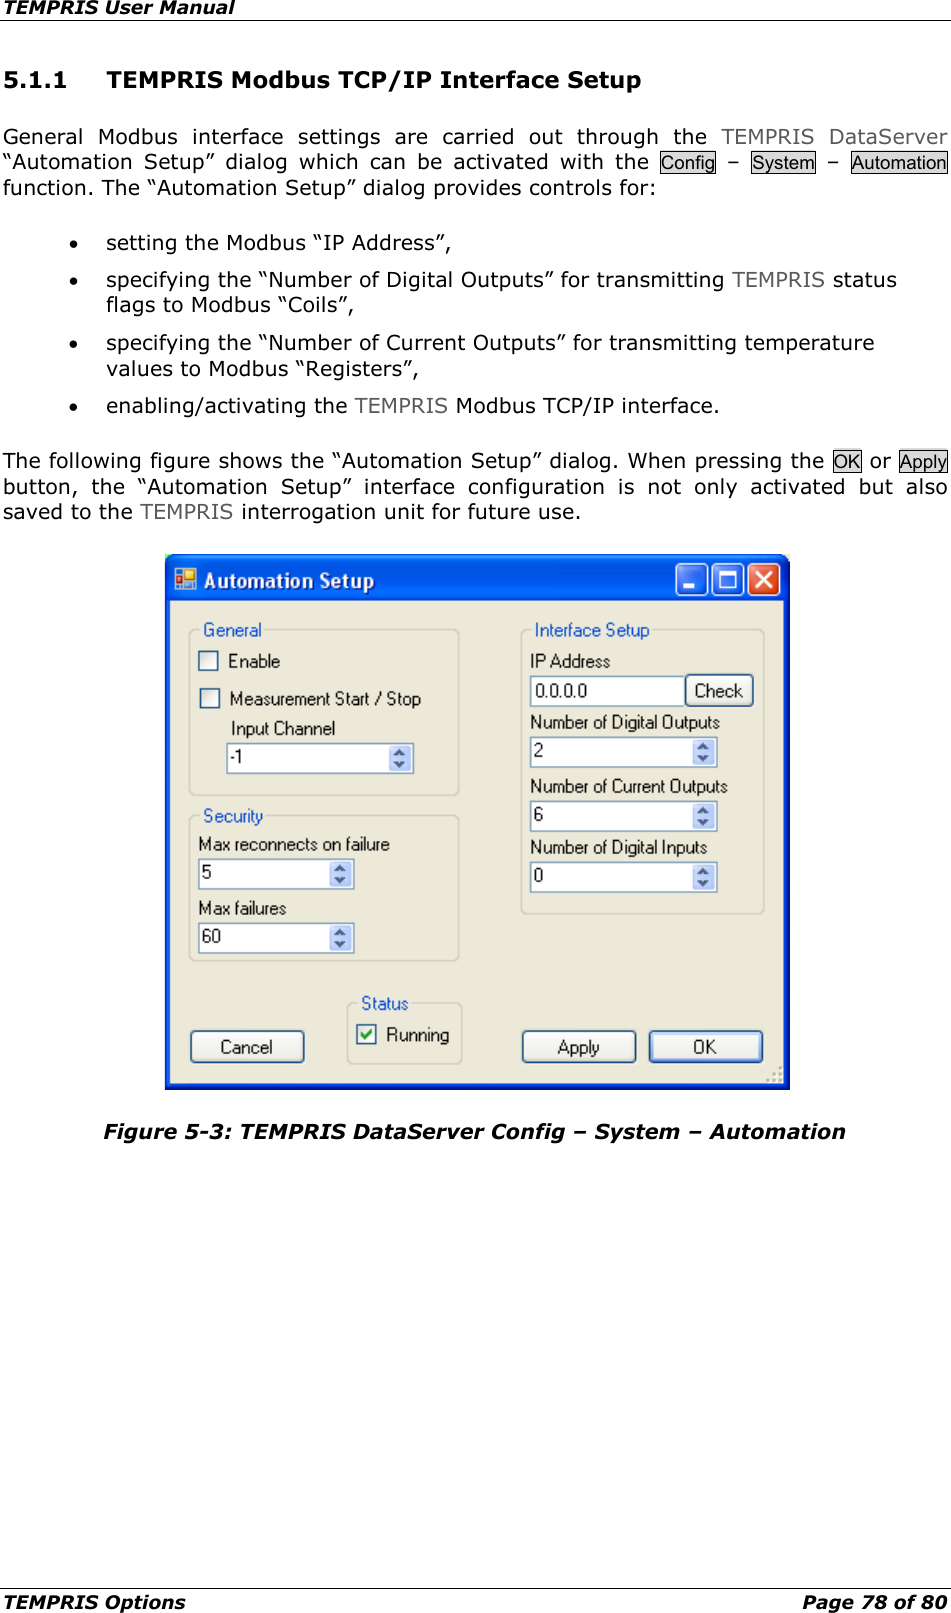 TEMPRIS User Manual TEMPRIS Options    Page 78 of 80 5.1.1 TEMPRIS Modbus TCP/IP Interface Setup General Modbus interface settings are carried out through the TEMPRIS DataServer “Automation Setup” dialog  which can be activated with the  Config  –  System  –  Automation function. The “Automation Setup” dialog provides controls for: • setting the Modbus “IP Address”, • specifying the “Number of Digital Outputs” for transmitting TEMPRIS status flags to Modbus “Coils”, • specifying the “Number of Current Outputs” for transmitting temperature values to Modbus “Registers”, • enabling/activating the TEMPRIS Modbus TCP/IP interface. The following figure shows the “Automation Setup” dialog. When pressing the OK or Apply button, the “Automation Setup” interface configuration is not only activated but also saved to the TEMPRIS interrogation unit for future use.  Figure 5-3: TEMPRIS DataServer Config – System – Automation  